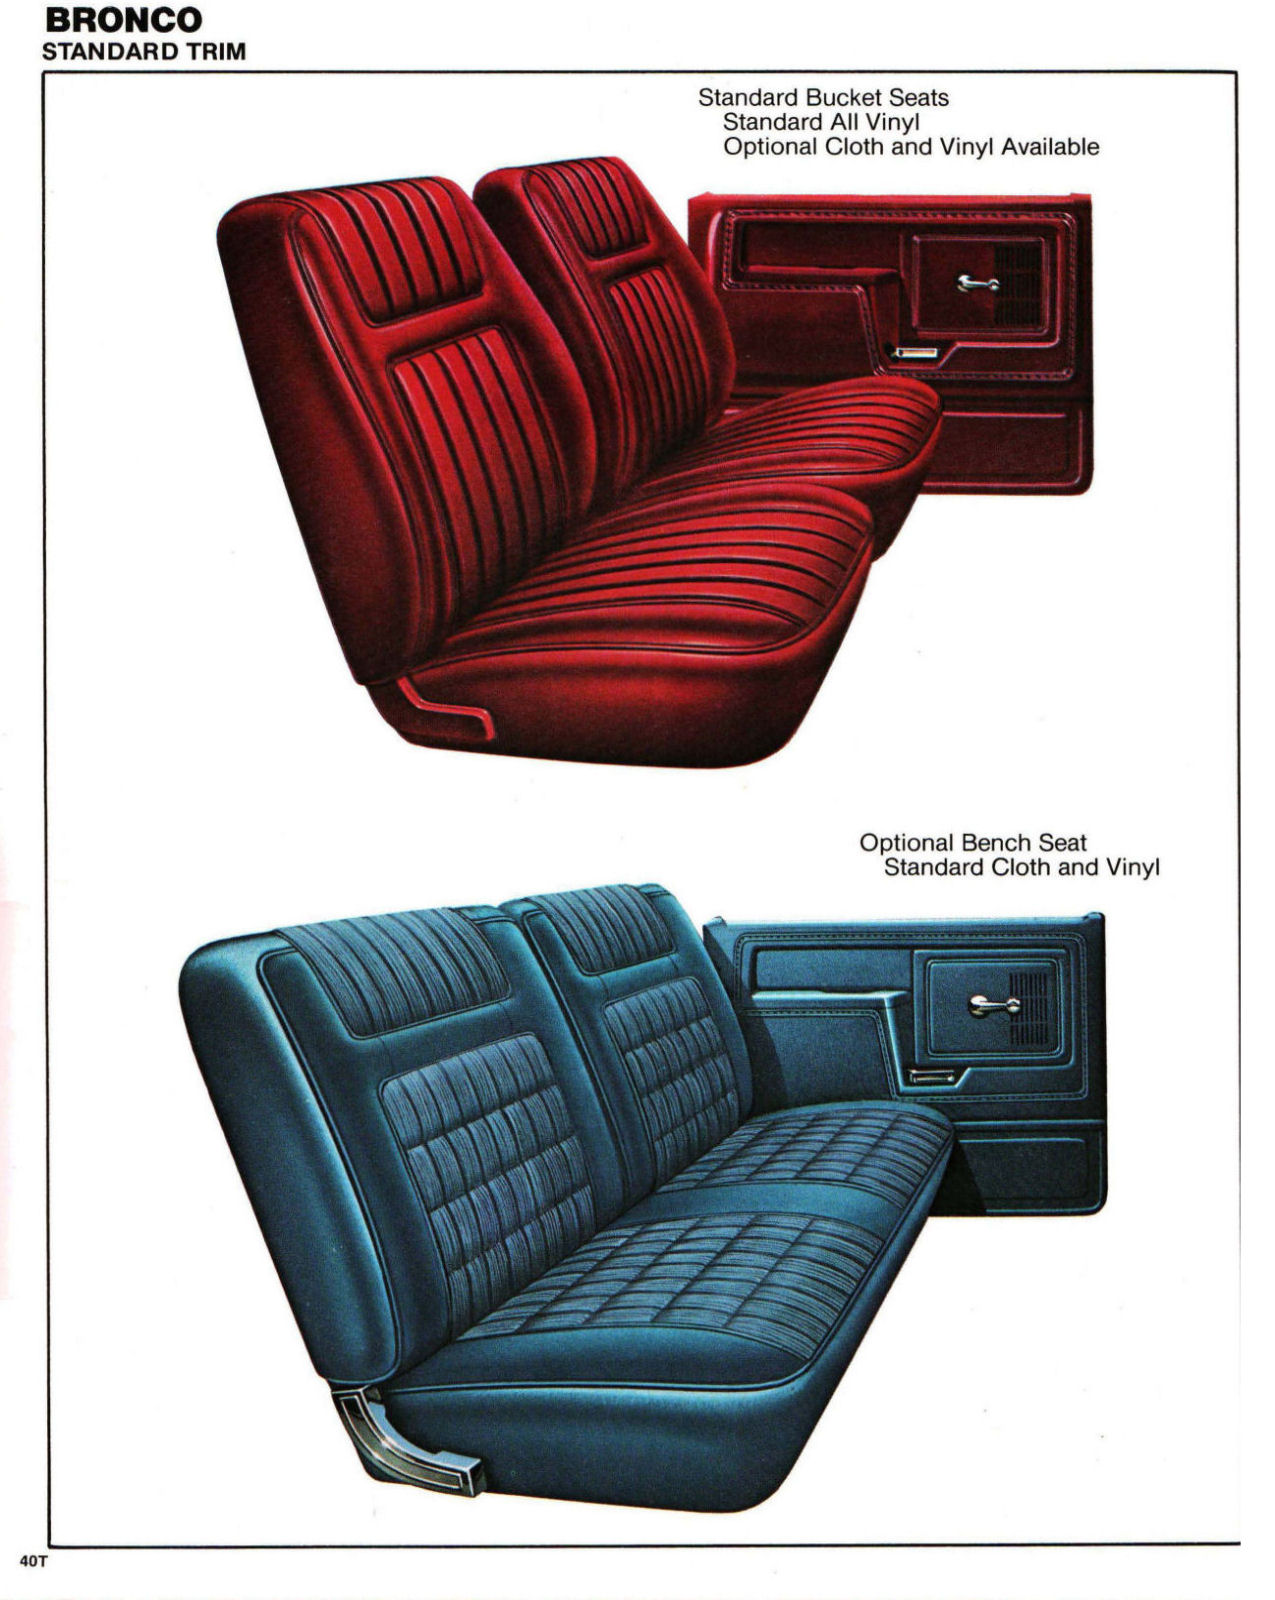 1986 Ford F-Series Color & Trim-14